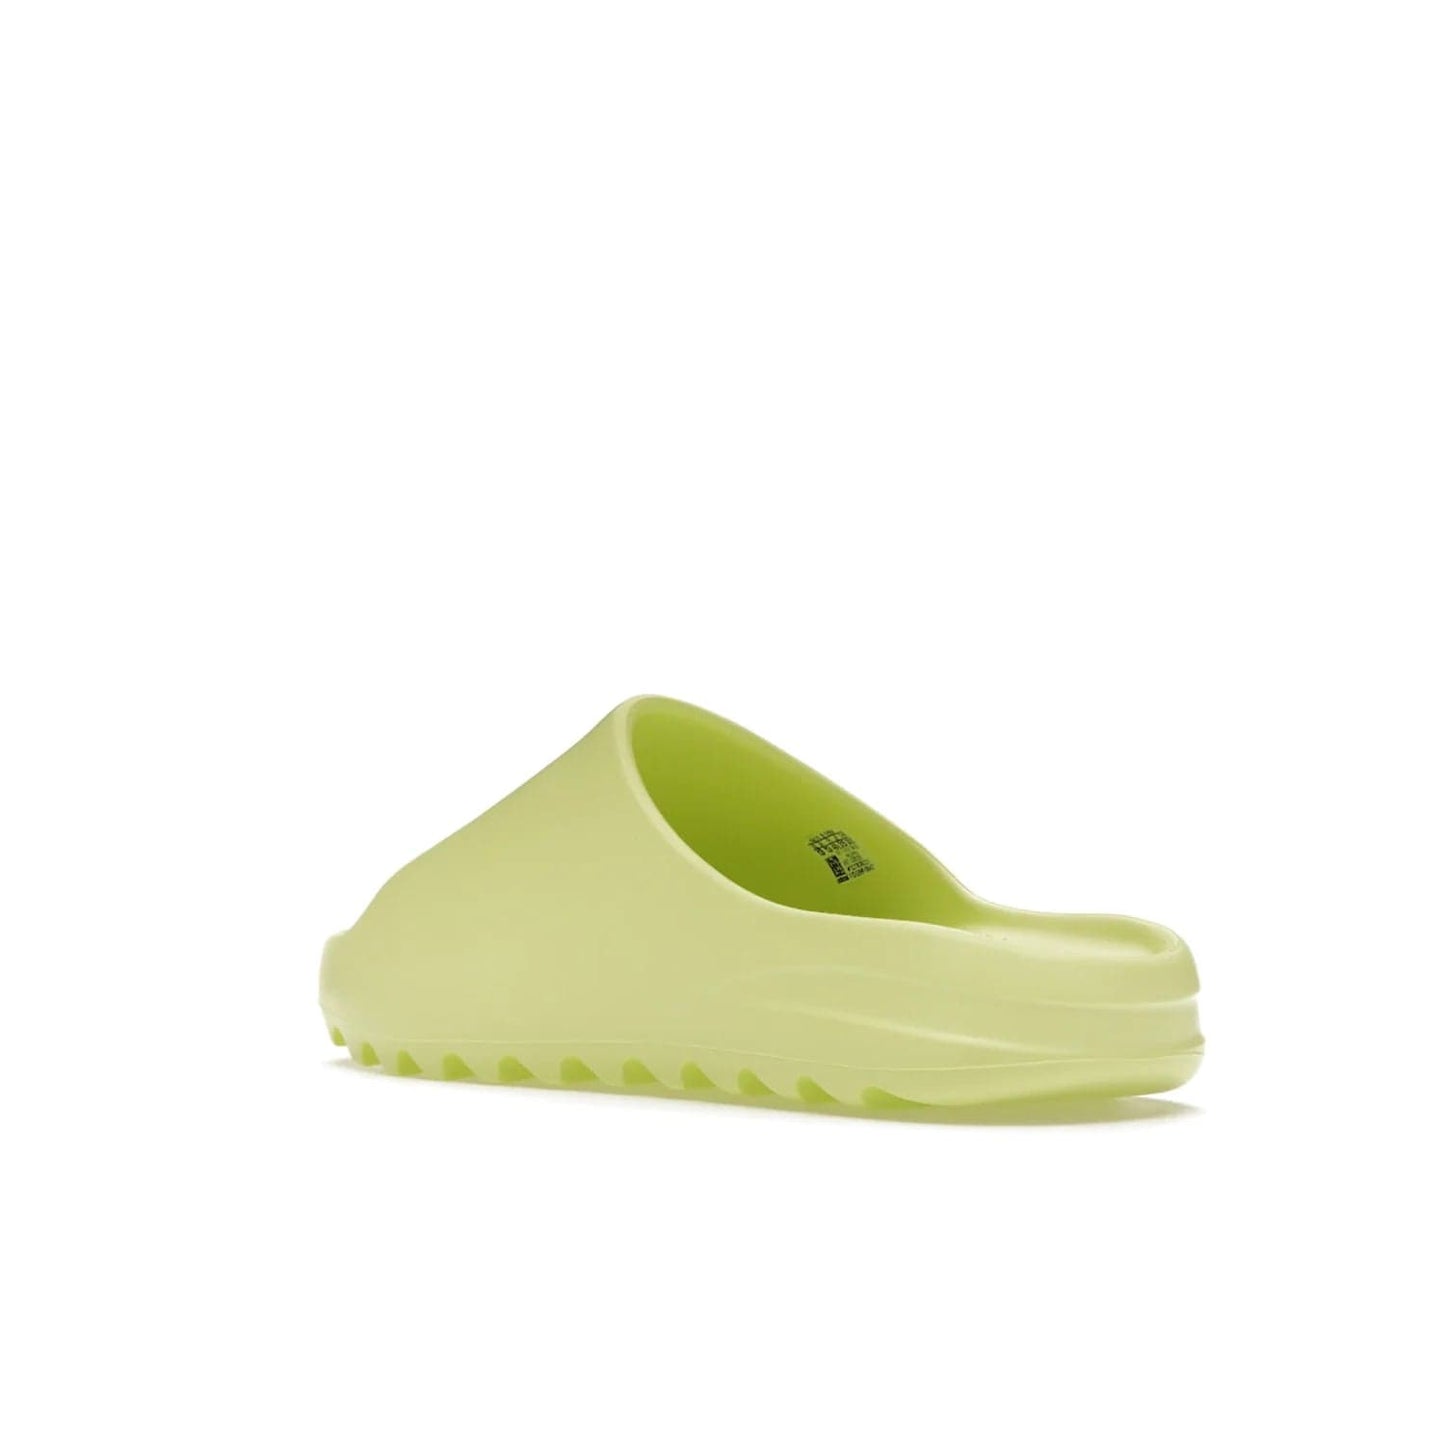 adidas Yeezy Slide Glow Green - Image 24 - Only at www.BallersClubKickz.com - Experience an unexpected summer style with the adidas Yeezy Slide Glow Green. This limited edition slide sandal provides a lightweight and durable construction and a bold Glow Green hue. Strategic grooves enhance traction and provide all-day comfort. Make a statement with the adidas Yeezy Slide Glow Green.